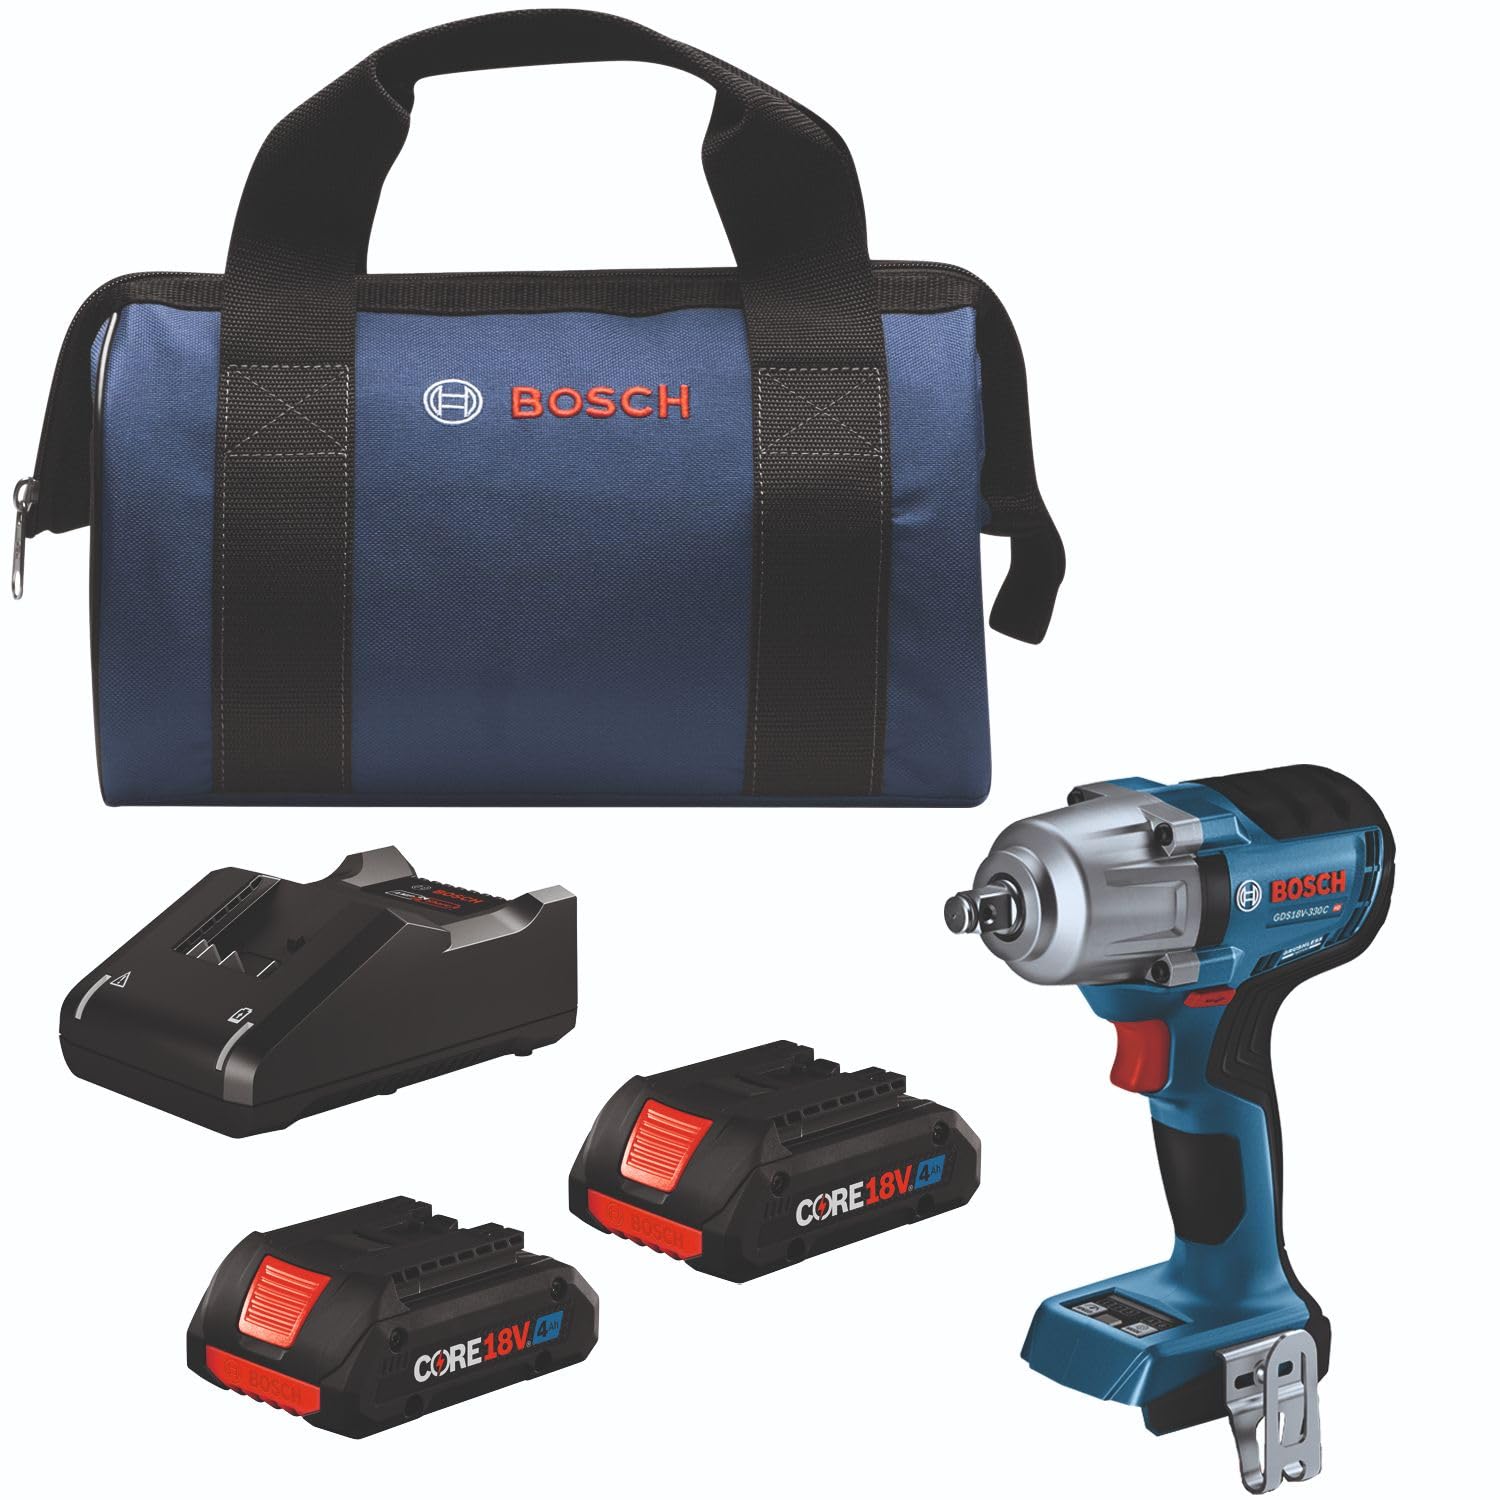 1/2" 18V Bosch Brushless Connected-Ready Mid-Torque Impact Wrench Drill Kit w/ 2 (4 Ah) Batteries $243.15 + Free Shipping